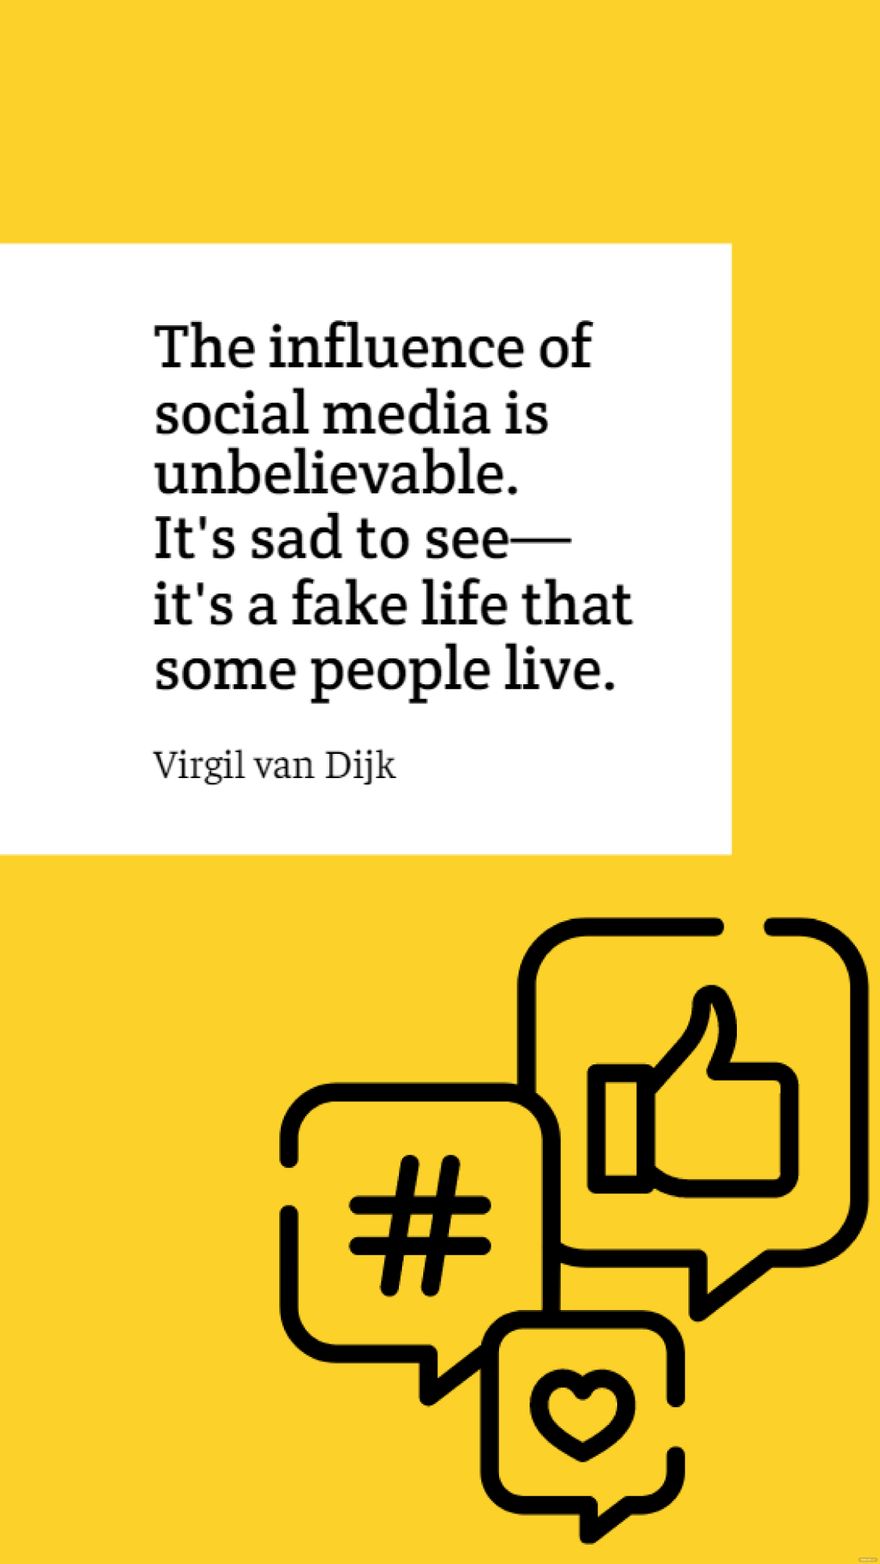 Virgil van Dijk - The influence of social media is unbelievable. It's sad to see - it's a fake life that some people live.